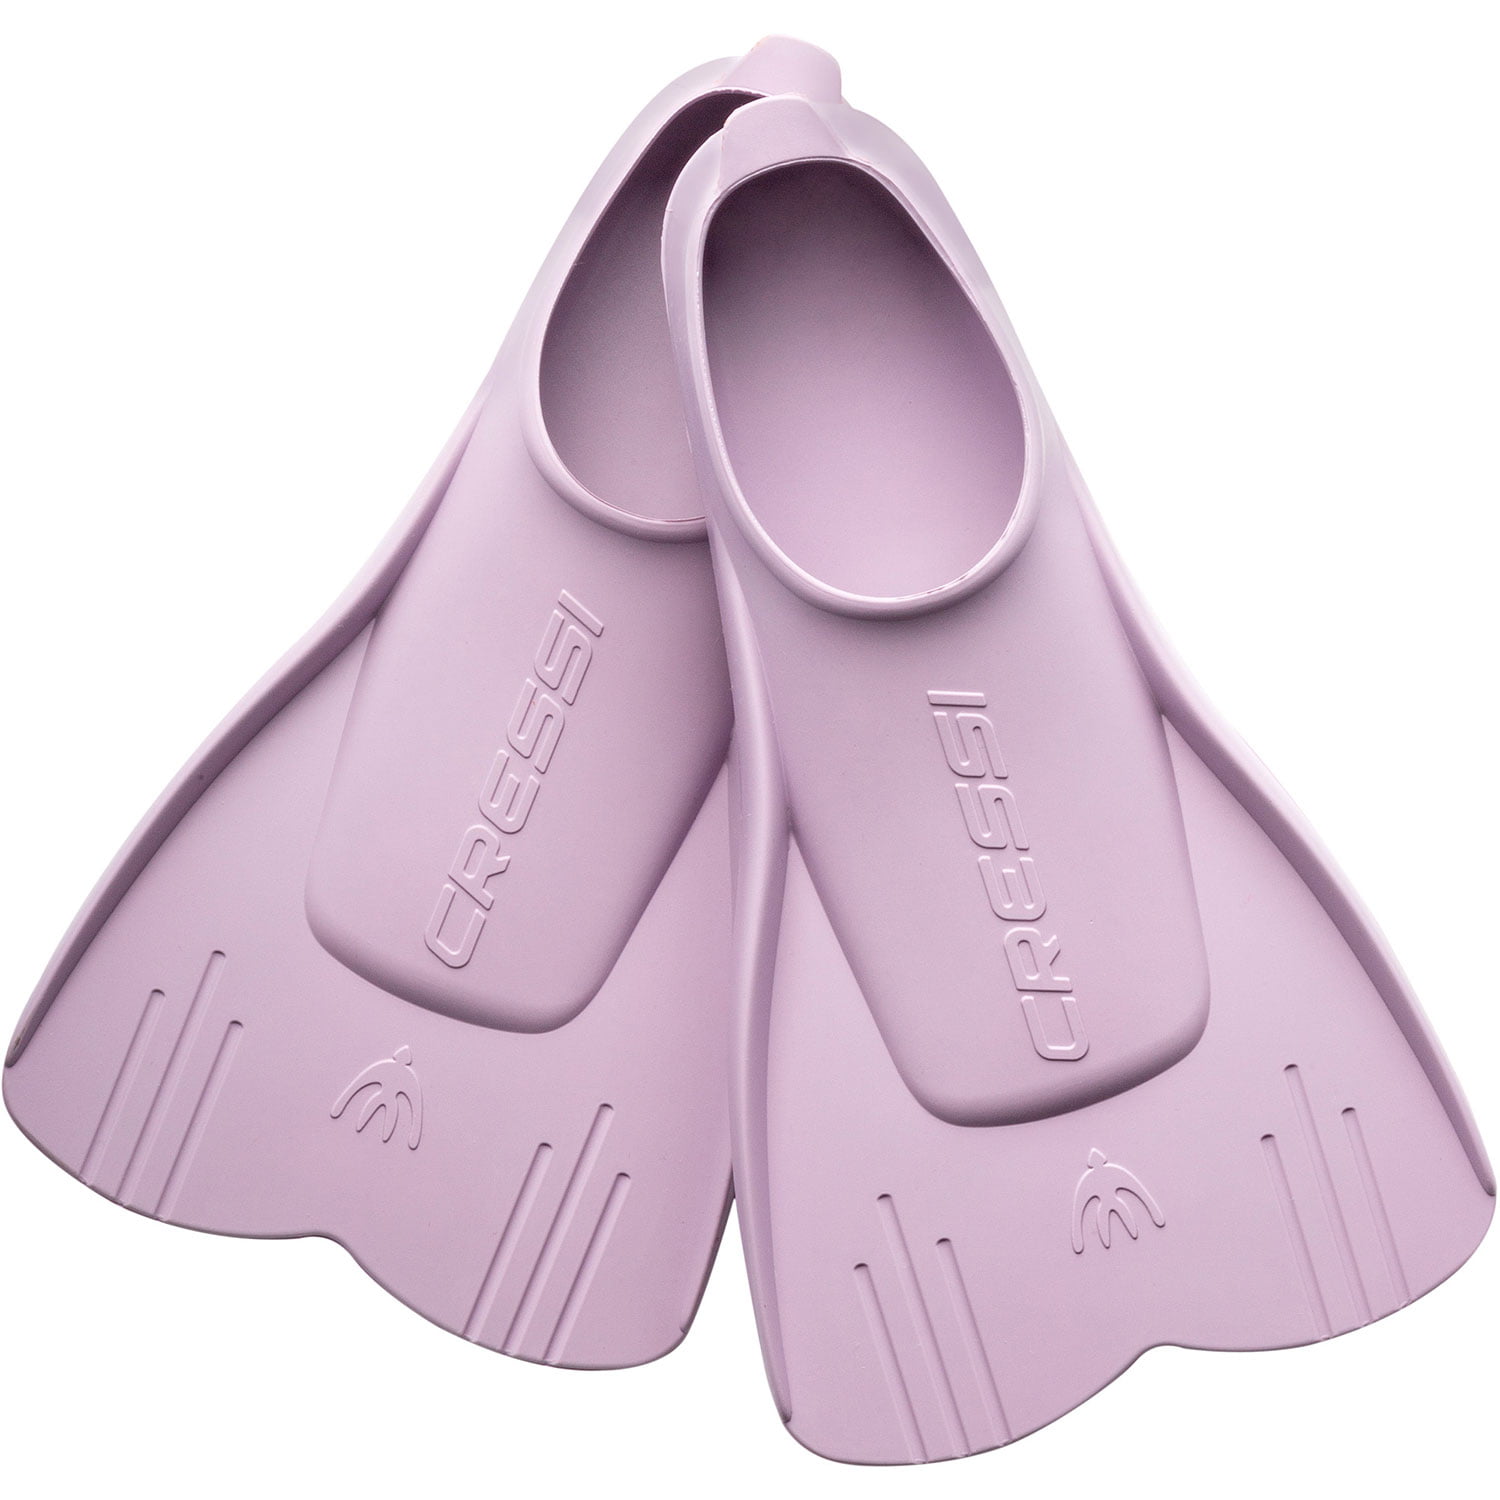 Mini Light for Kids 1 Years Old and up Cressi Short Floating Swim Fins to Learn to Swim Designed in Italy 